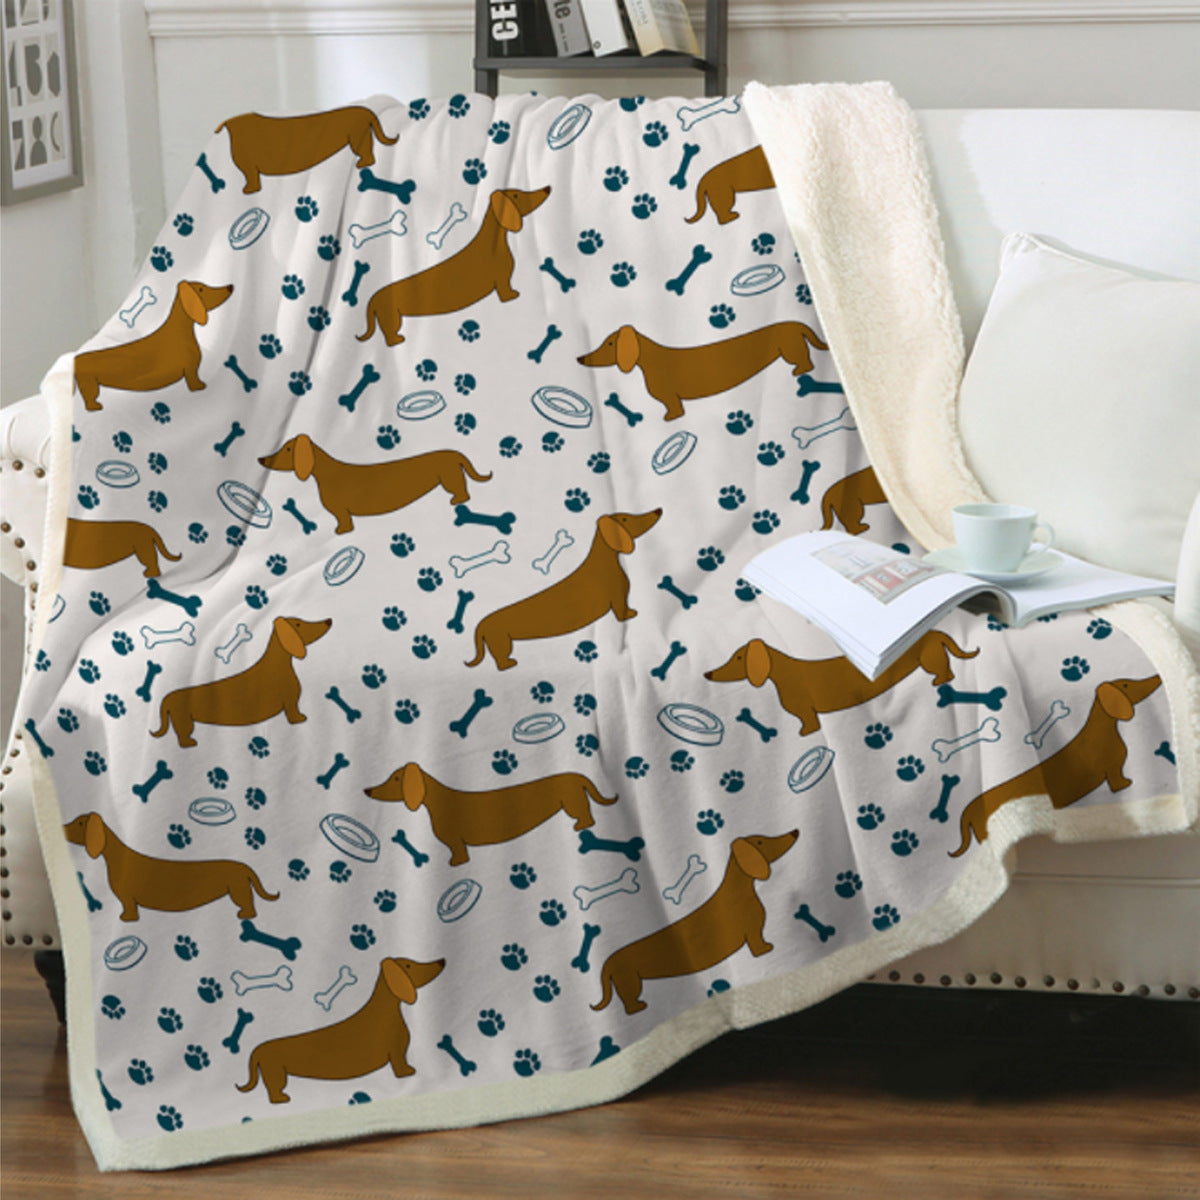 Cute Dog Print Fleece Blankets for Christmas-Blankets-1-4-40*60 inches-Free Shipping at meselling99